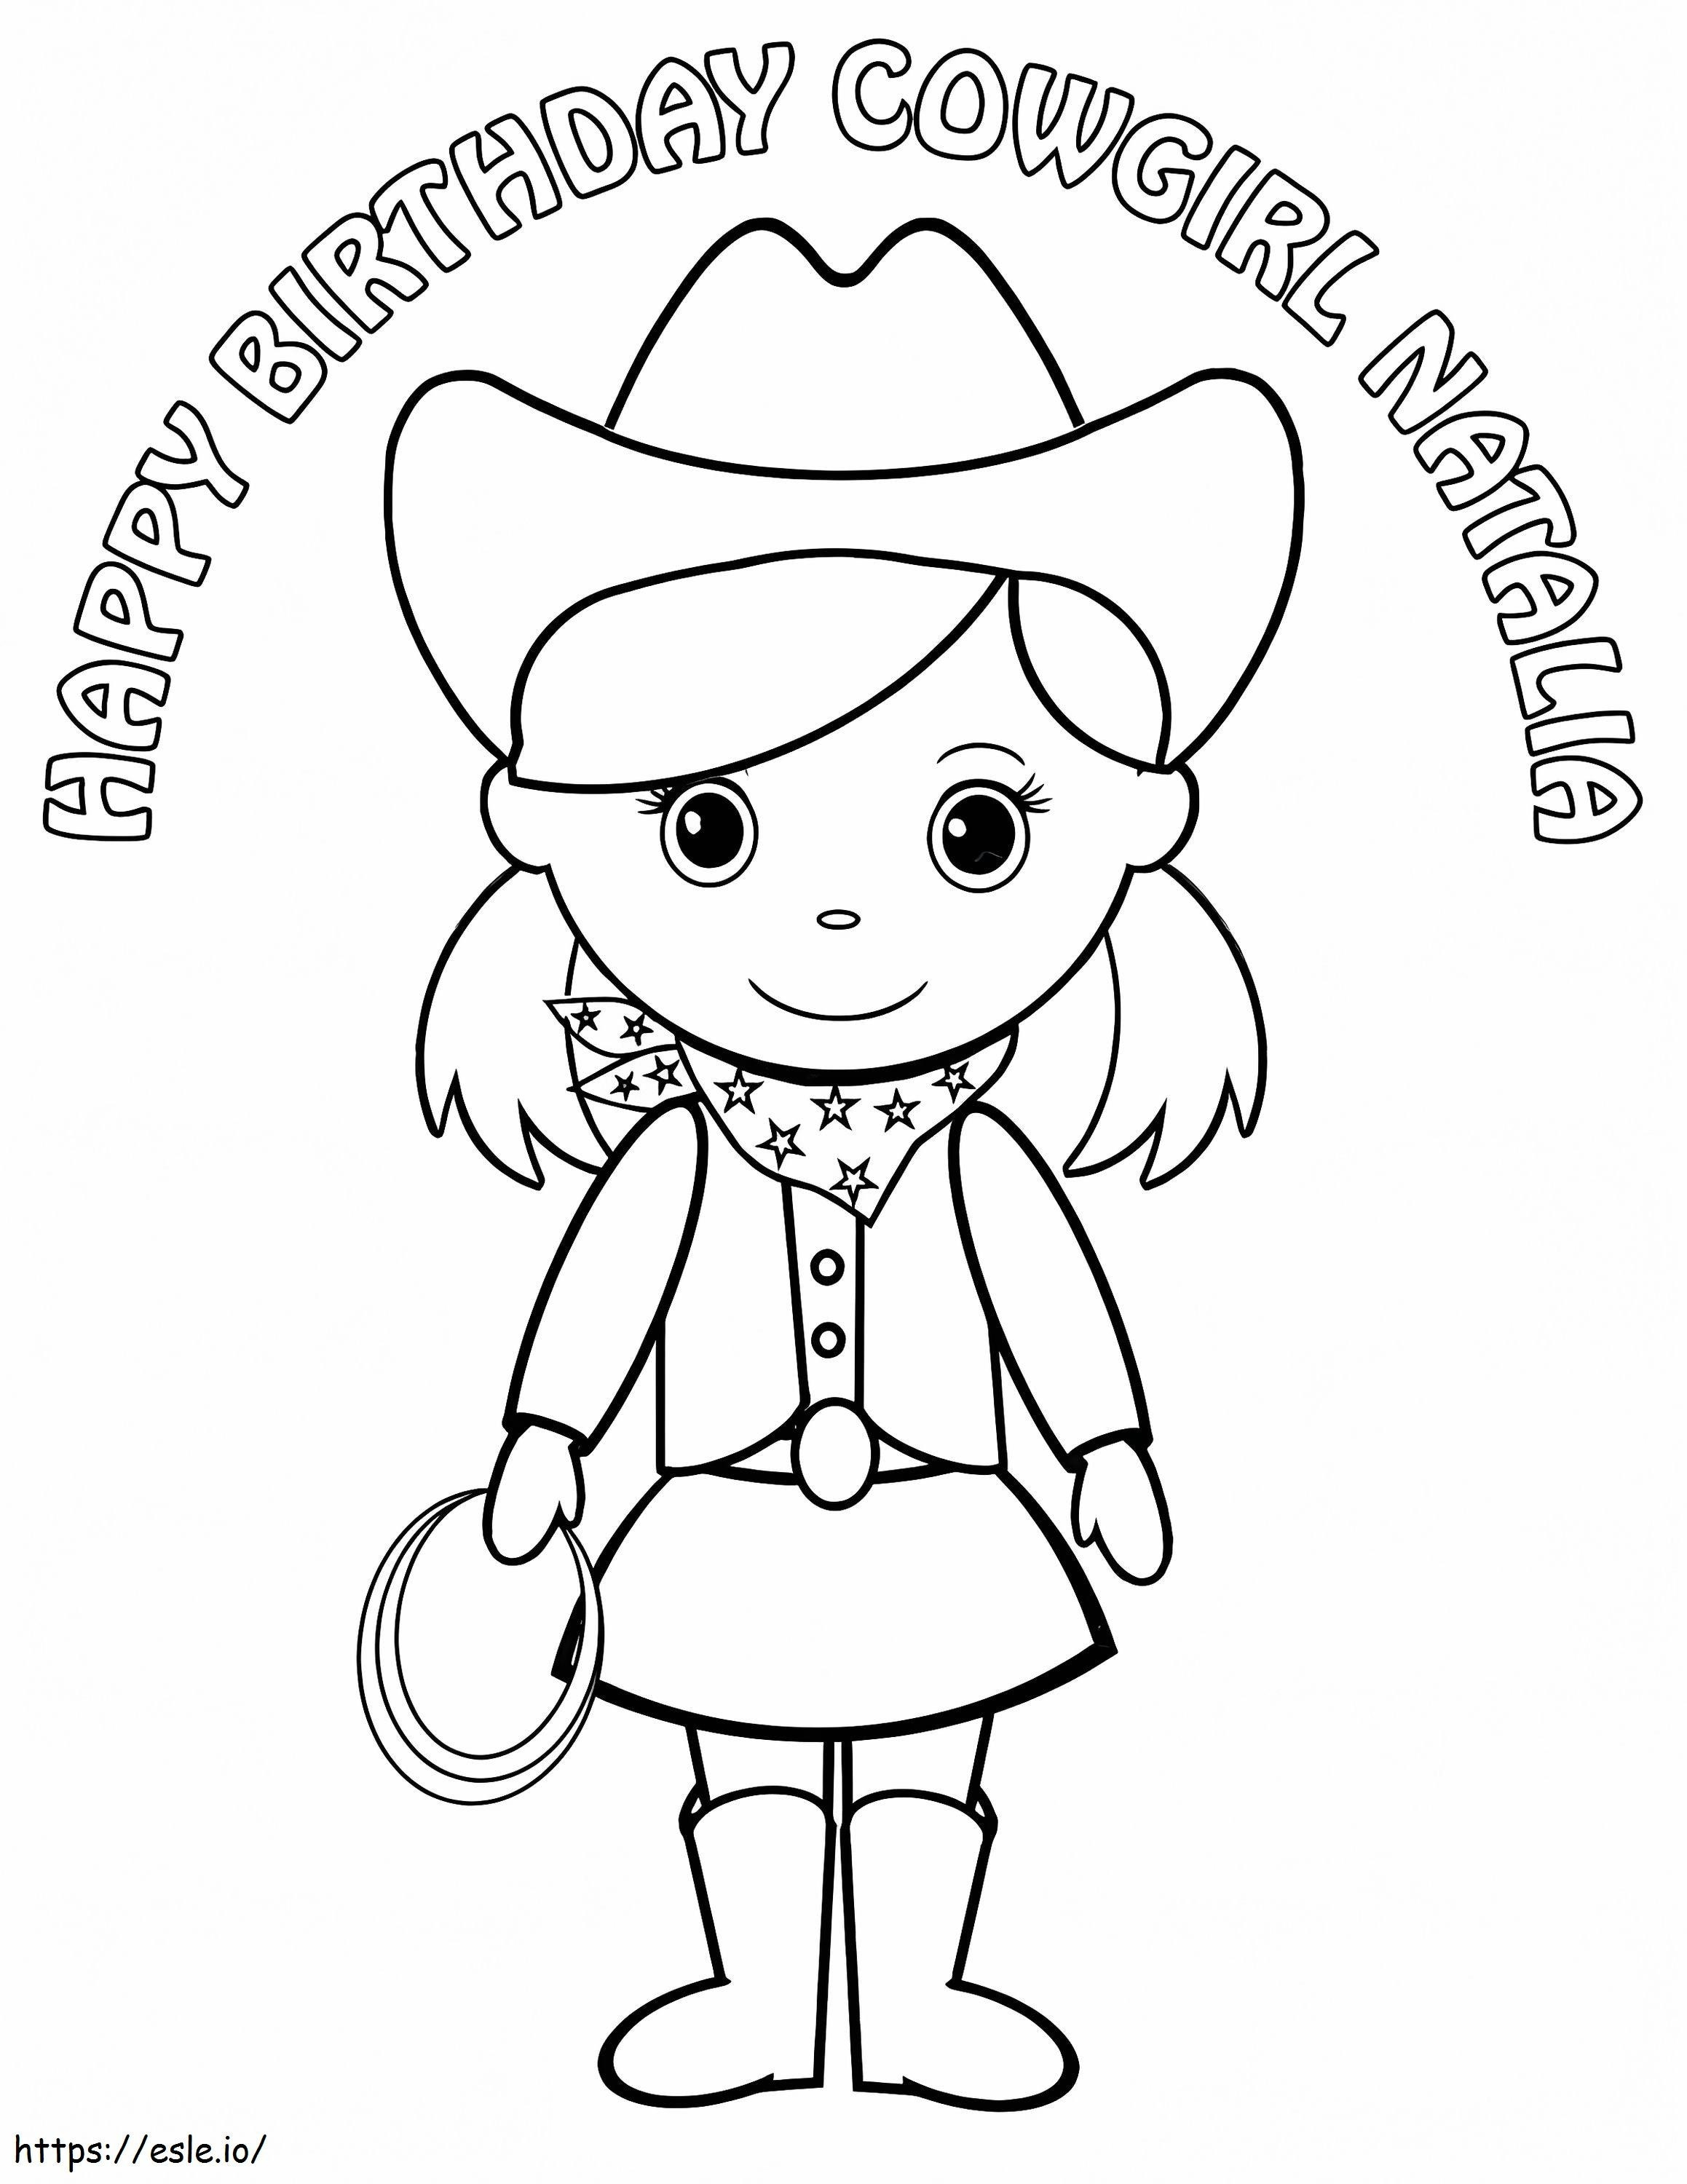 Happy Birthday Cowgirl coloring page